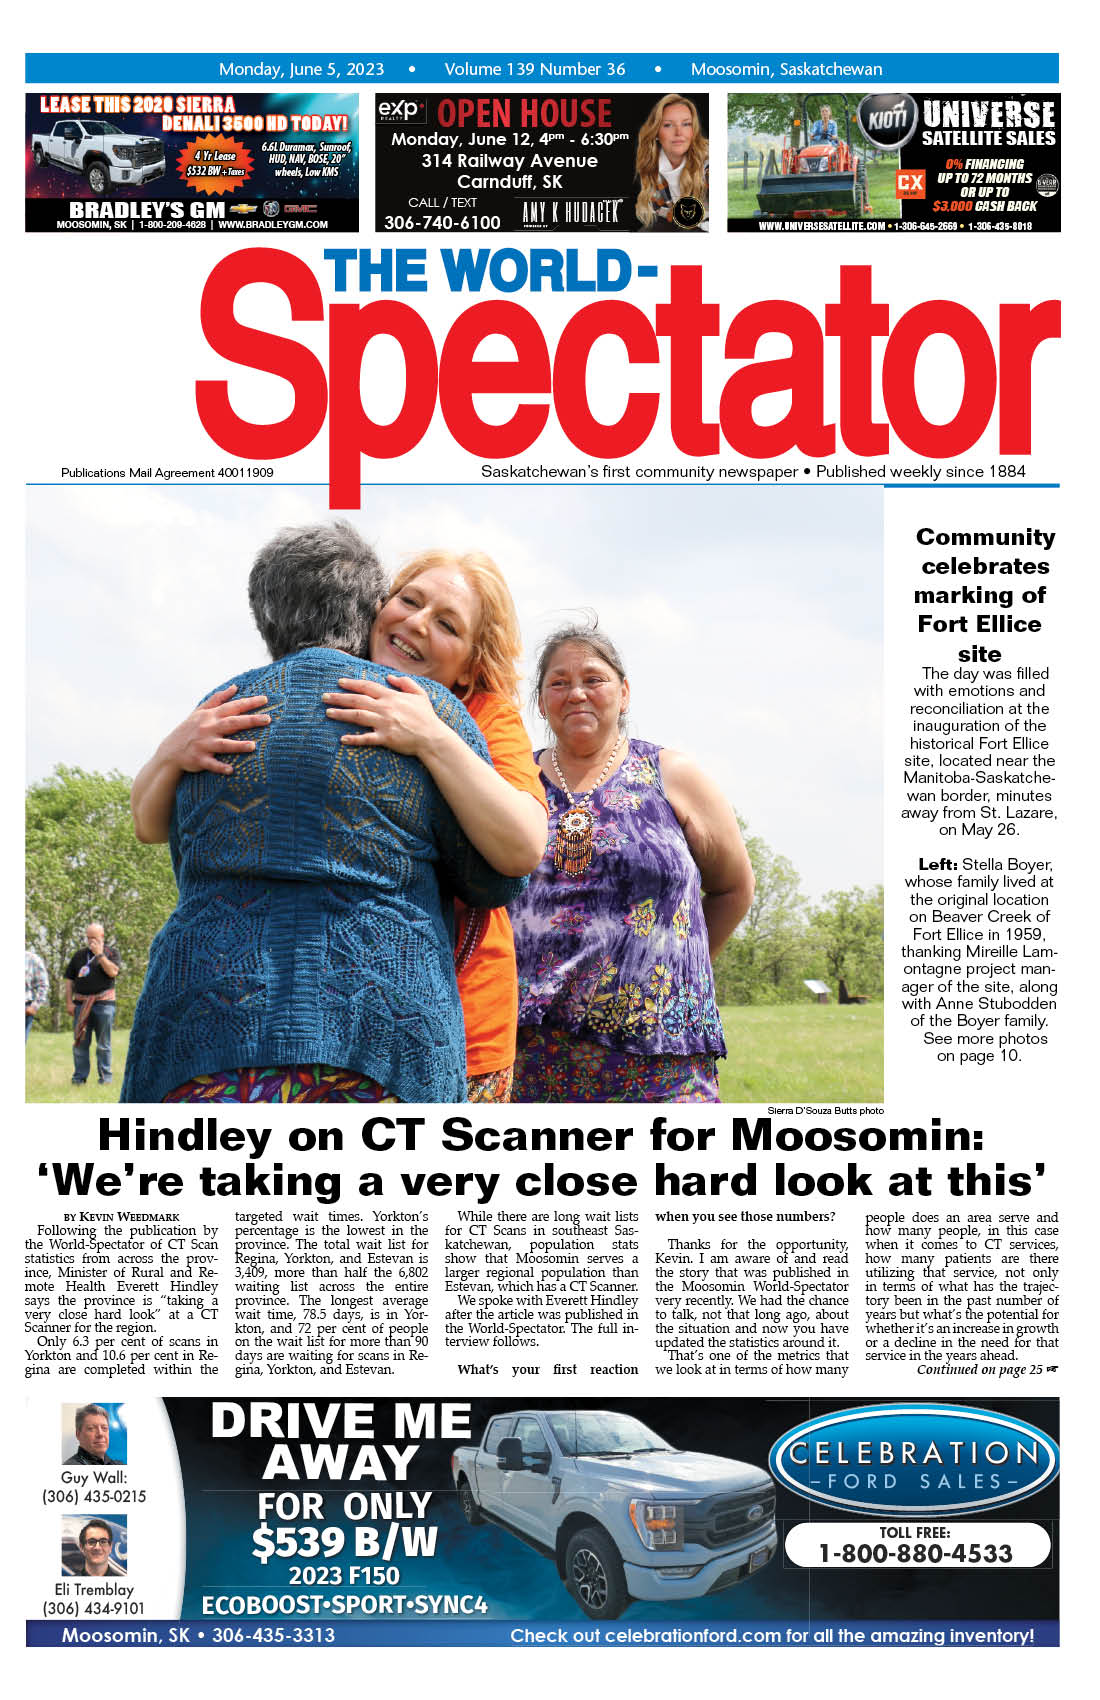 Hindley on CT Scanner for Moosomin: ‘We’re taking a very close hard look at this’